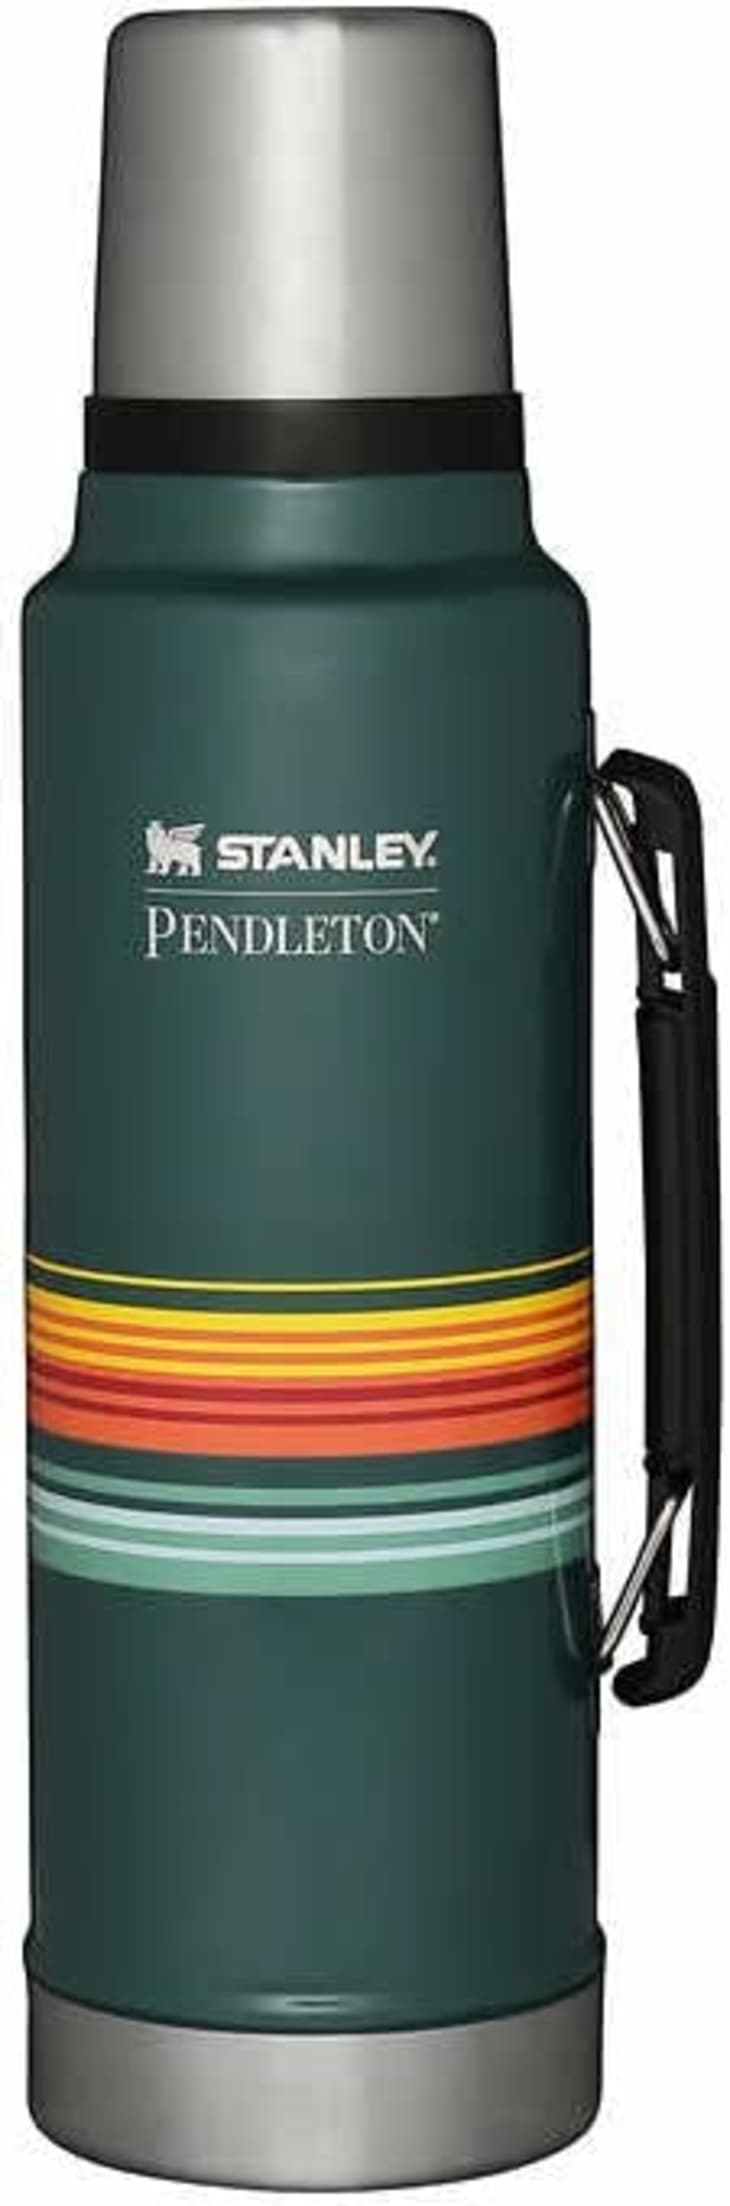 Product Image: Stanley Pendleton Patterned 1.5-Quart Thermos